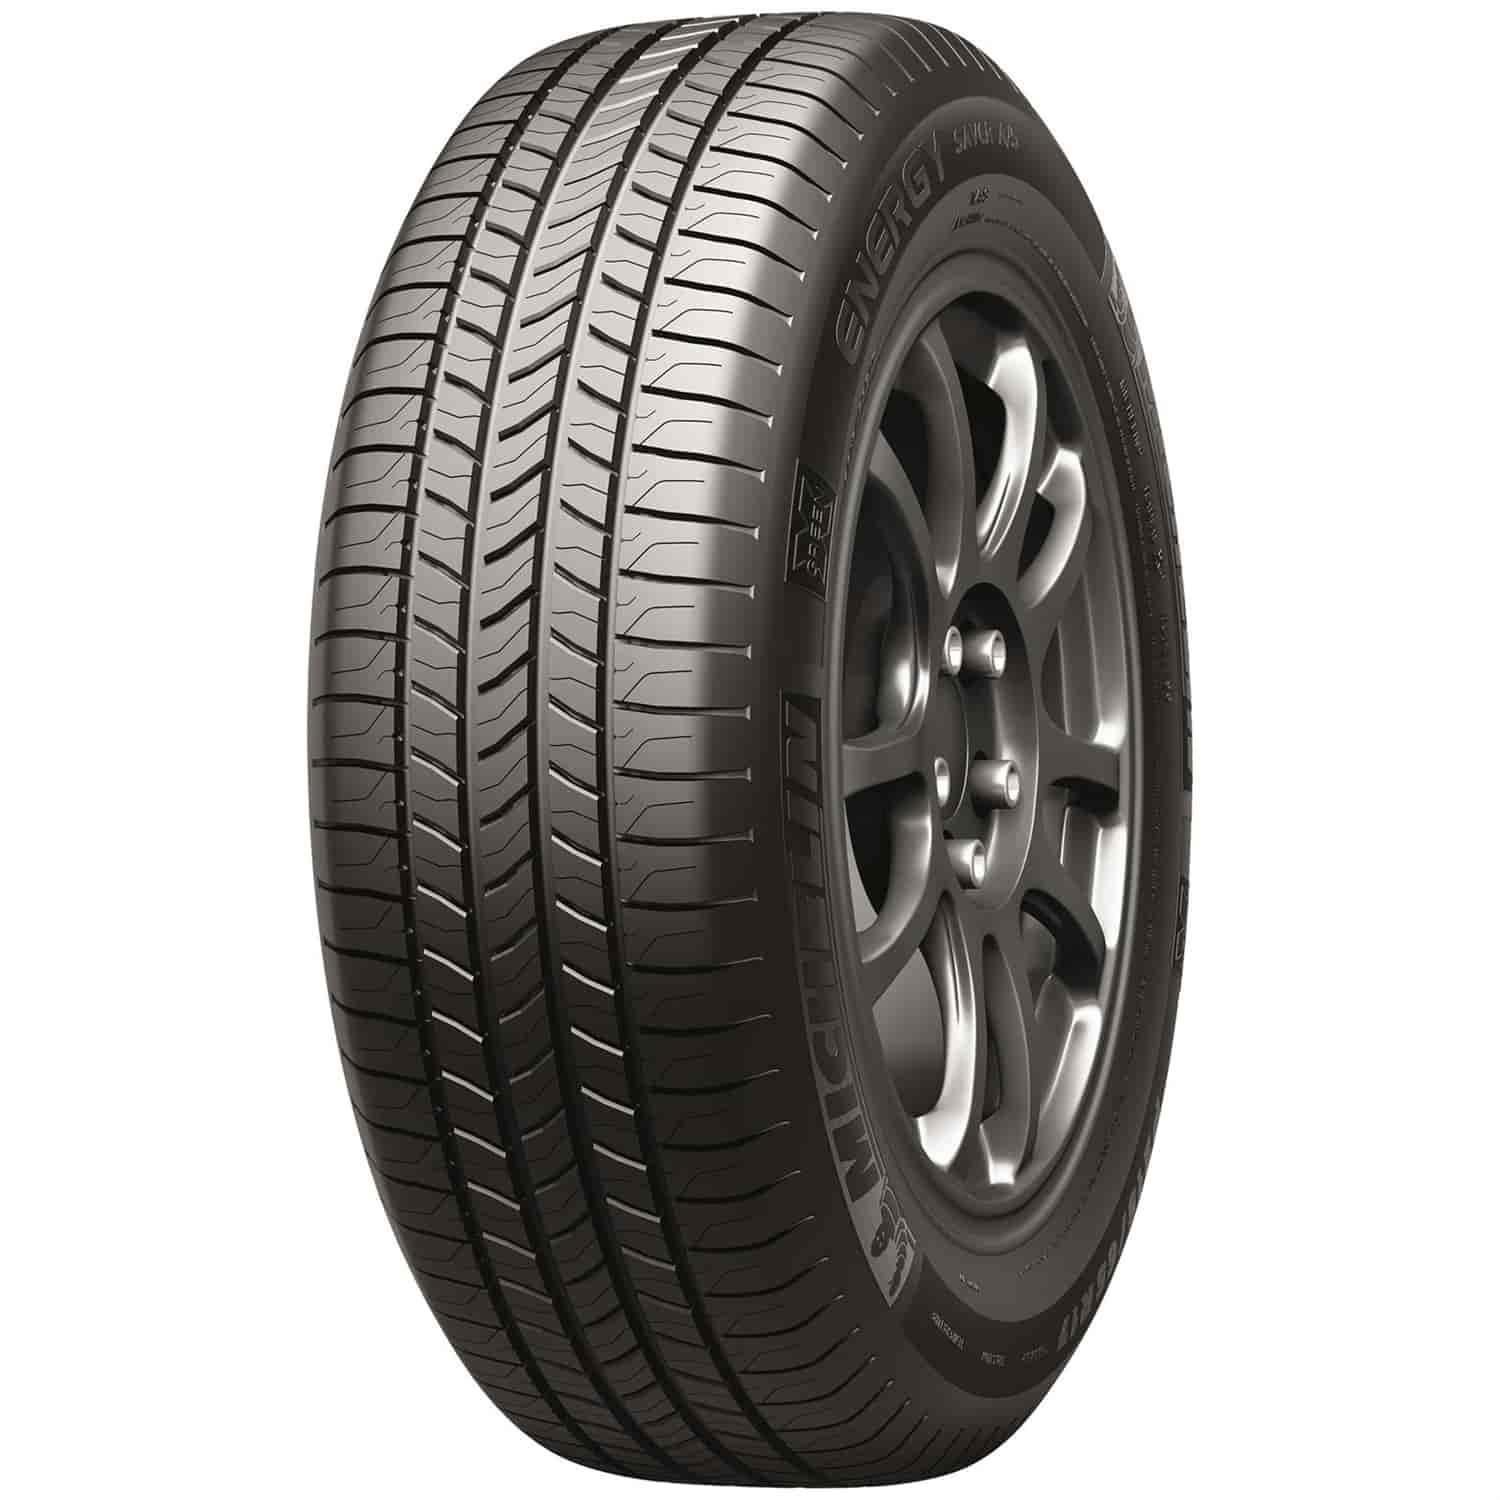 Energy Saver A/S 215/50R17 91H BSW